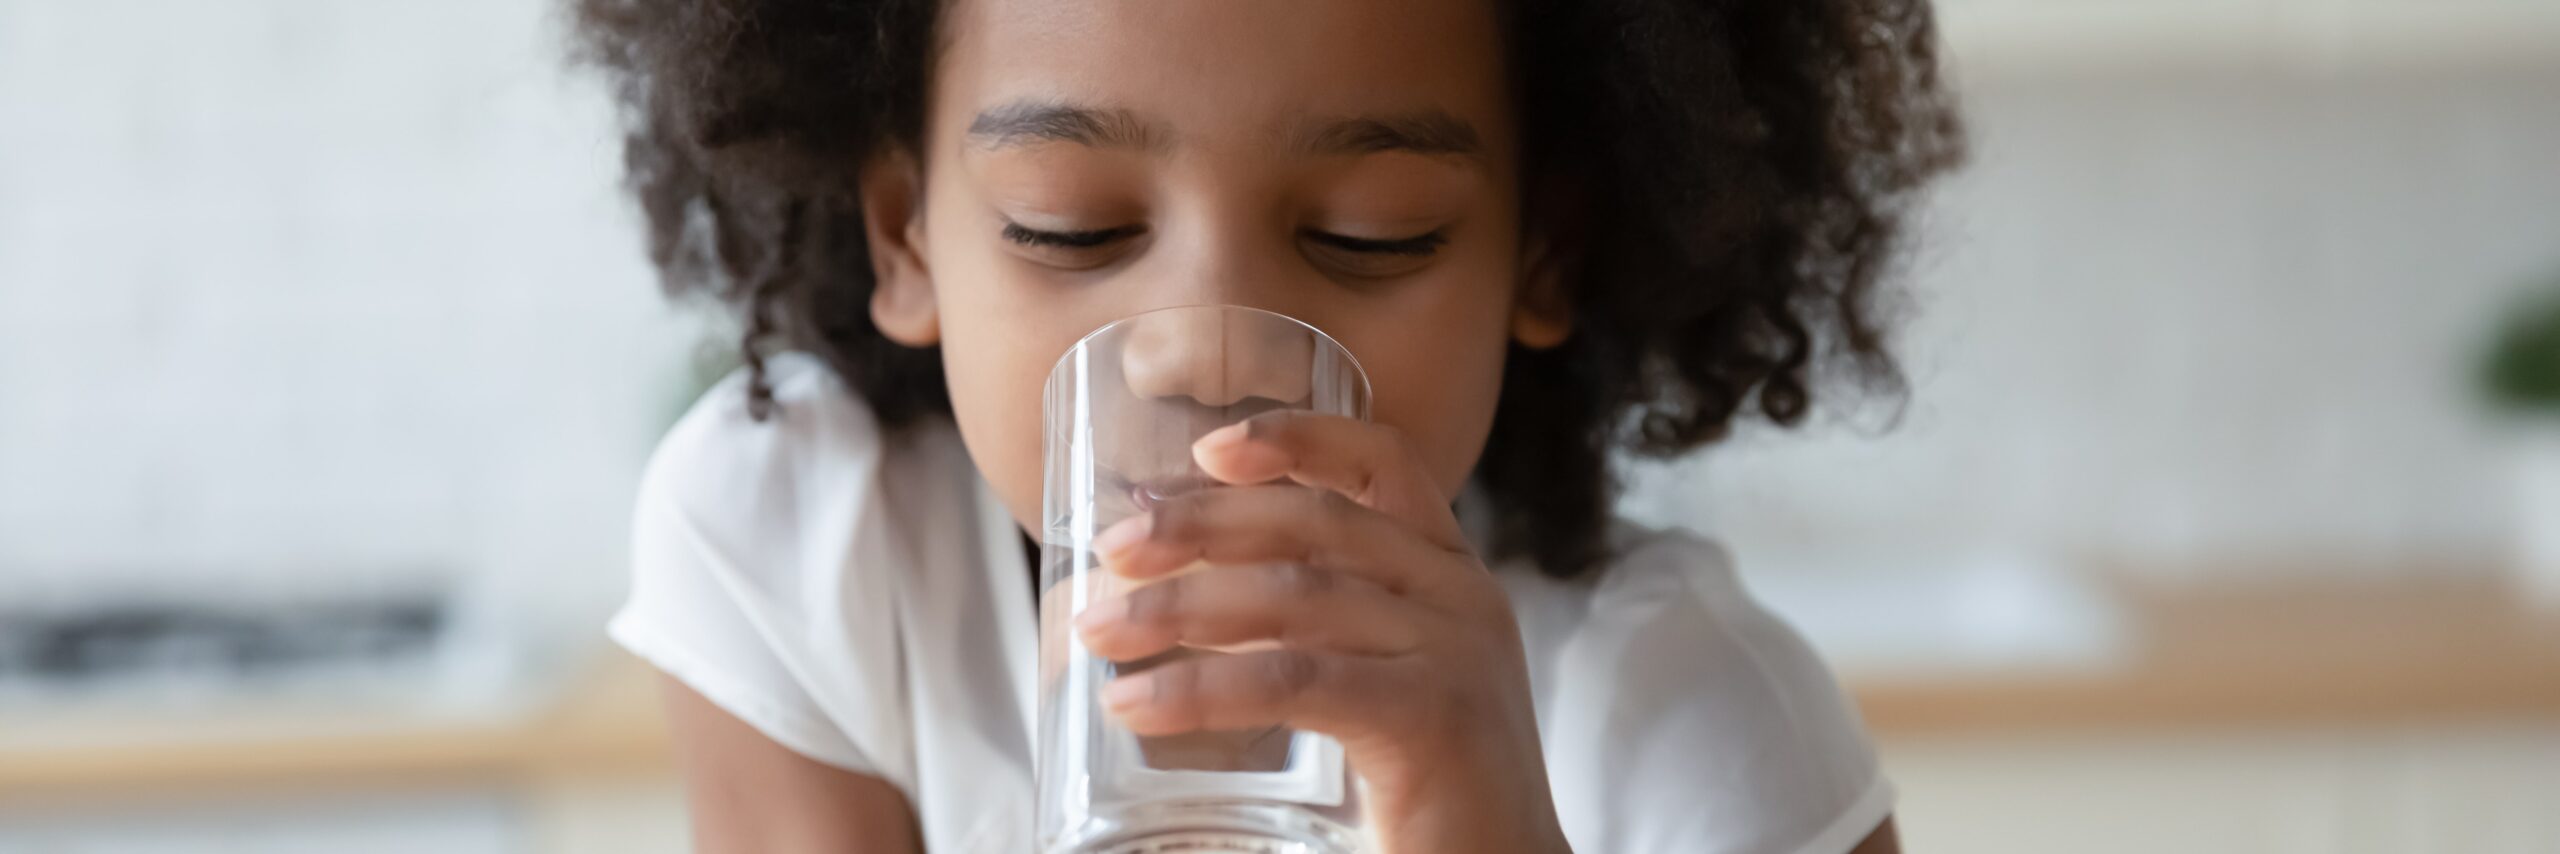 A young girl is drinking a glass of water.